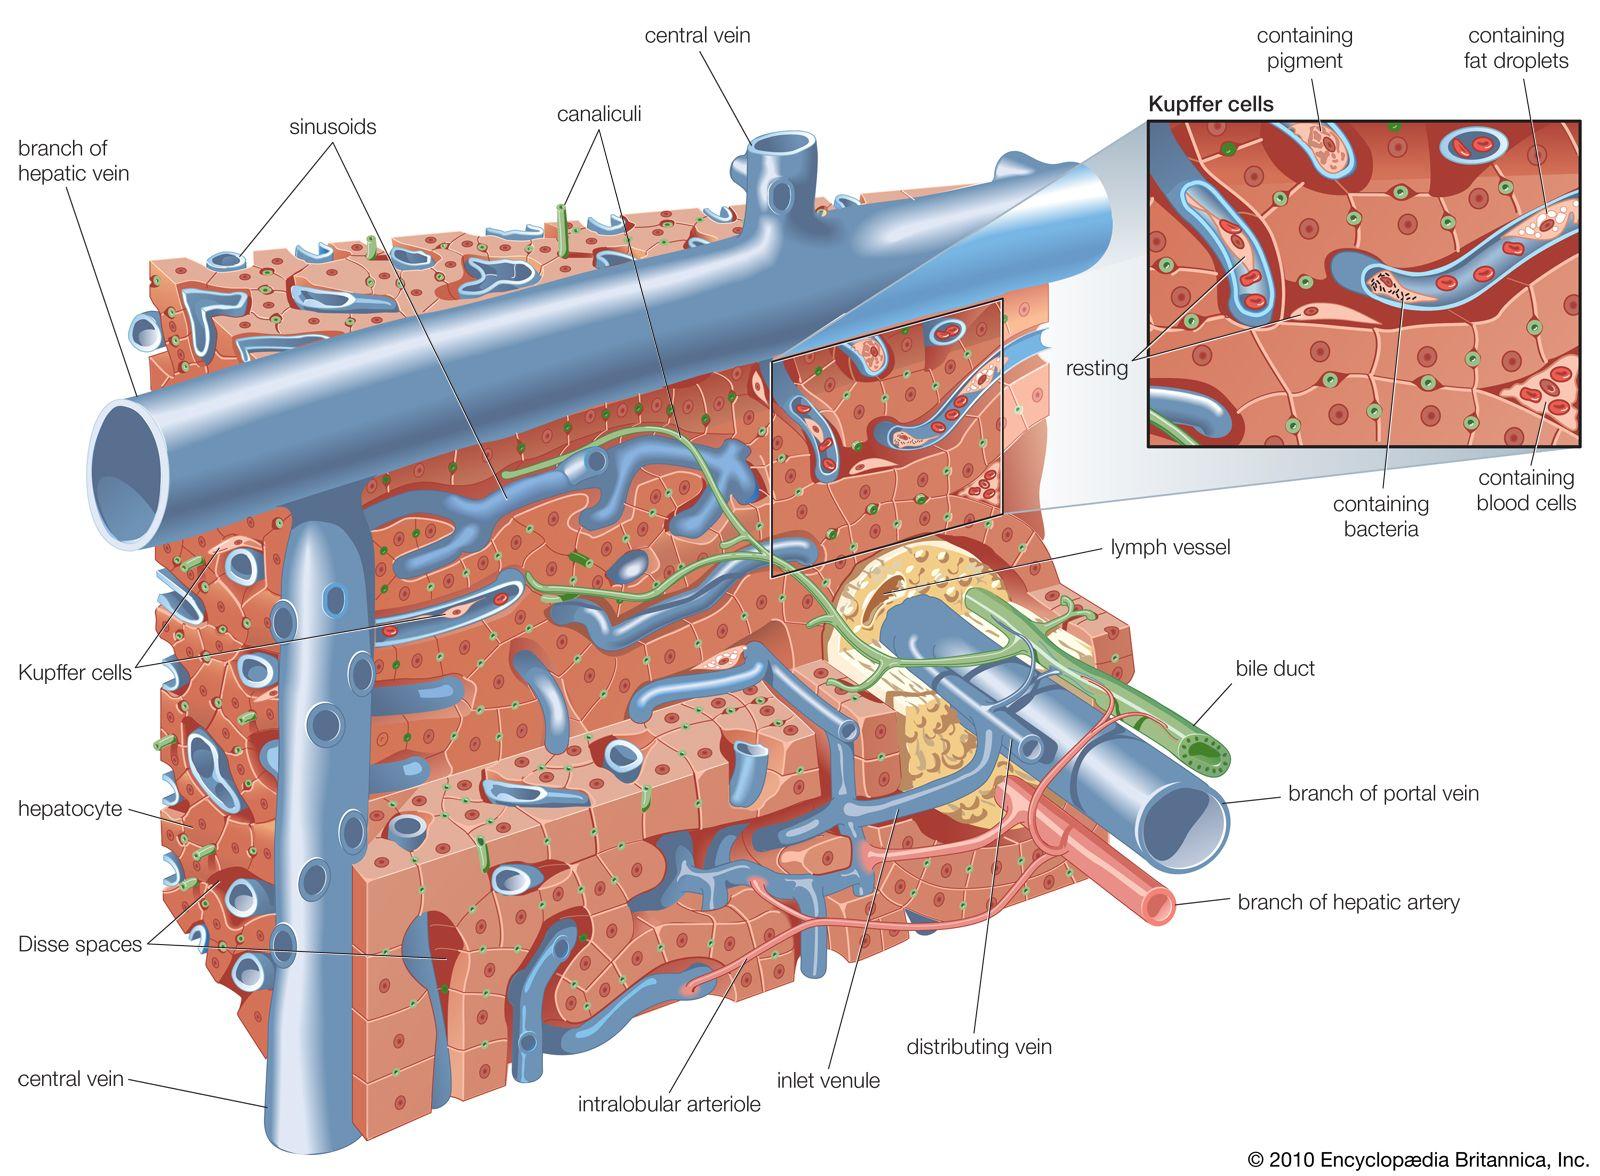 The microscopic layout of the liver